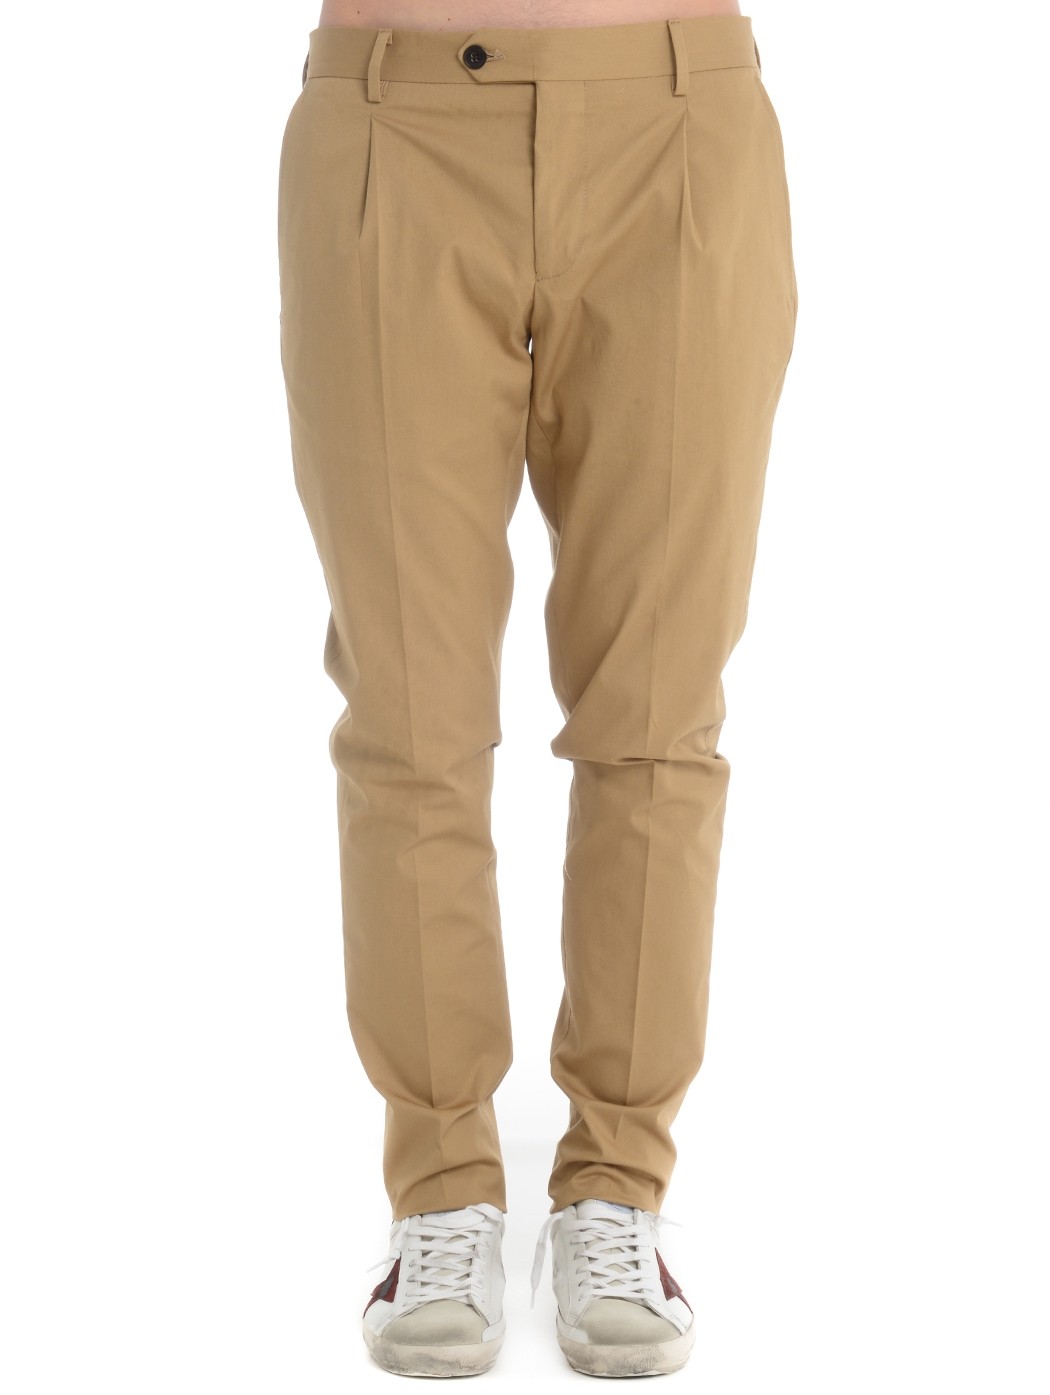  MAN TROUSERS,SPRING SUMMER TROUSERS,COTTON TROUSERS,SKIN FIT TROUSERS,INCOTEX TROUSERS,JACOB COHEN TROUSERS,NEIL BARRETT TROUSERS,MSGM TROUSERS  BRIAN DALES JK4557